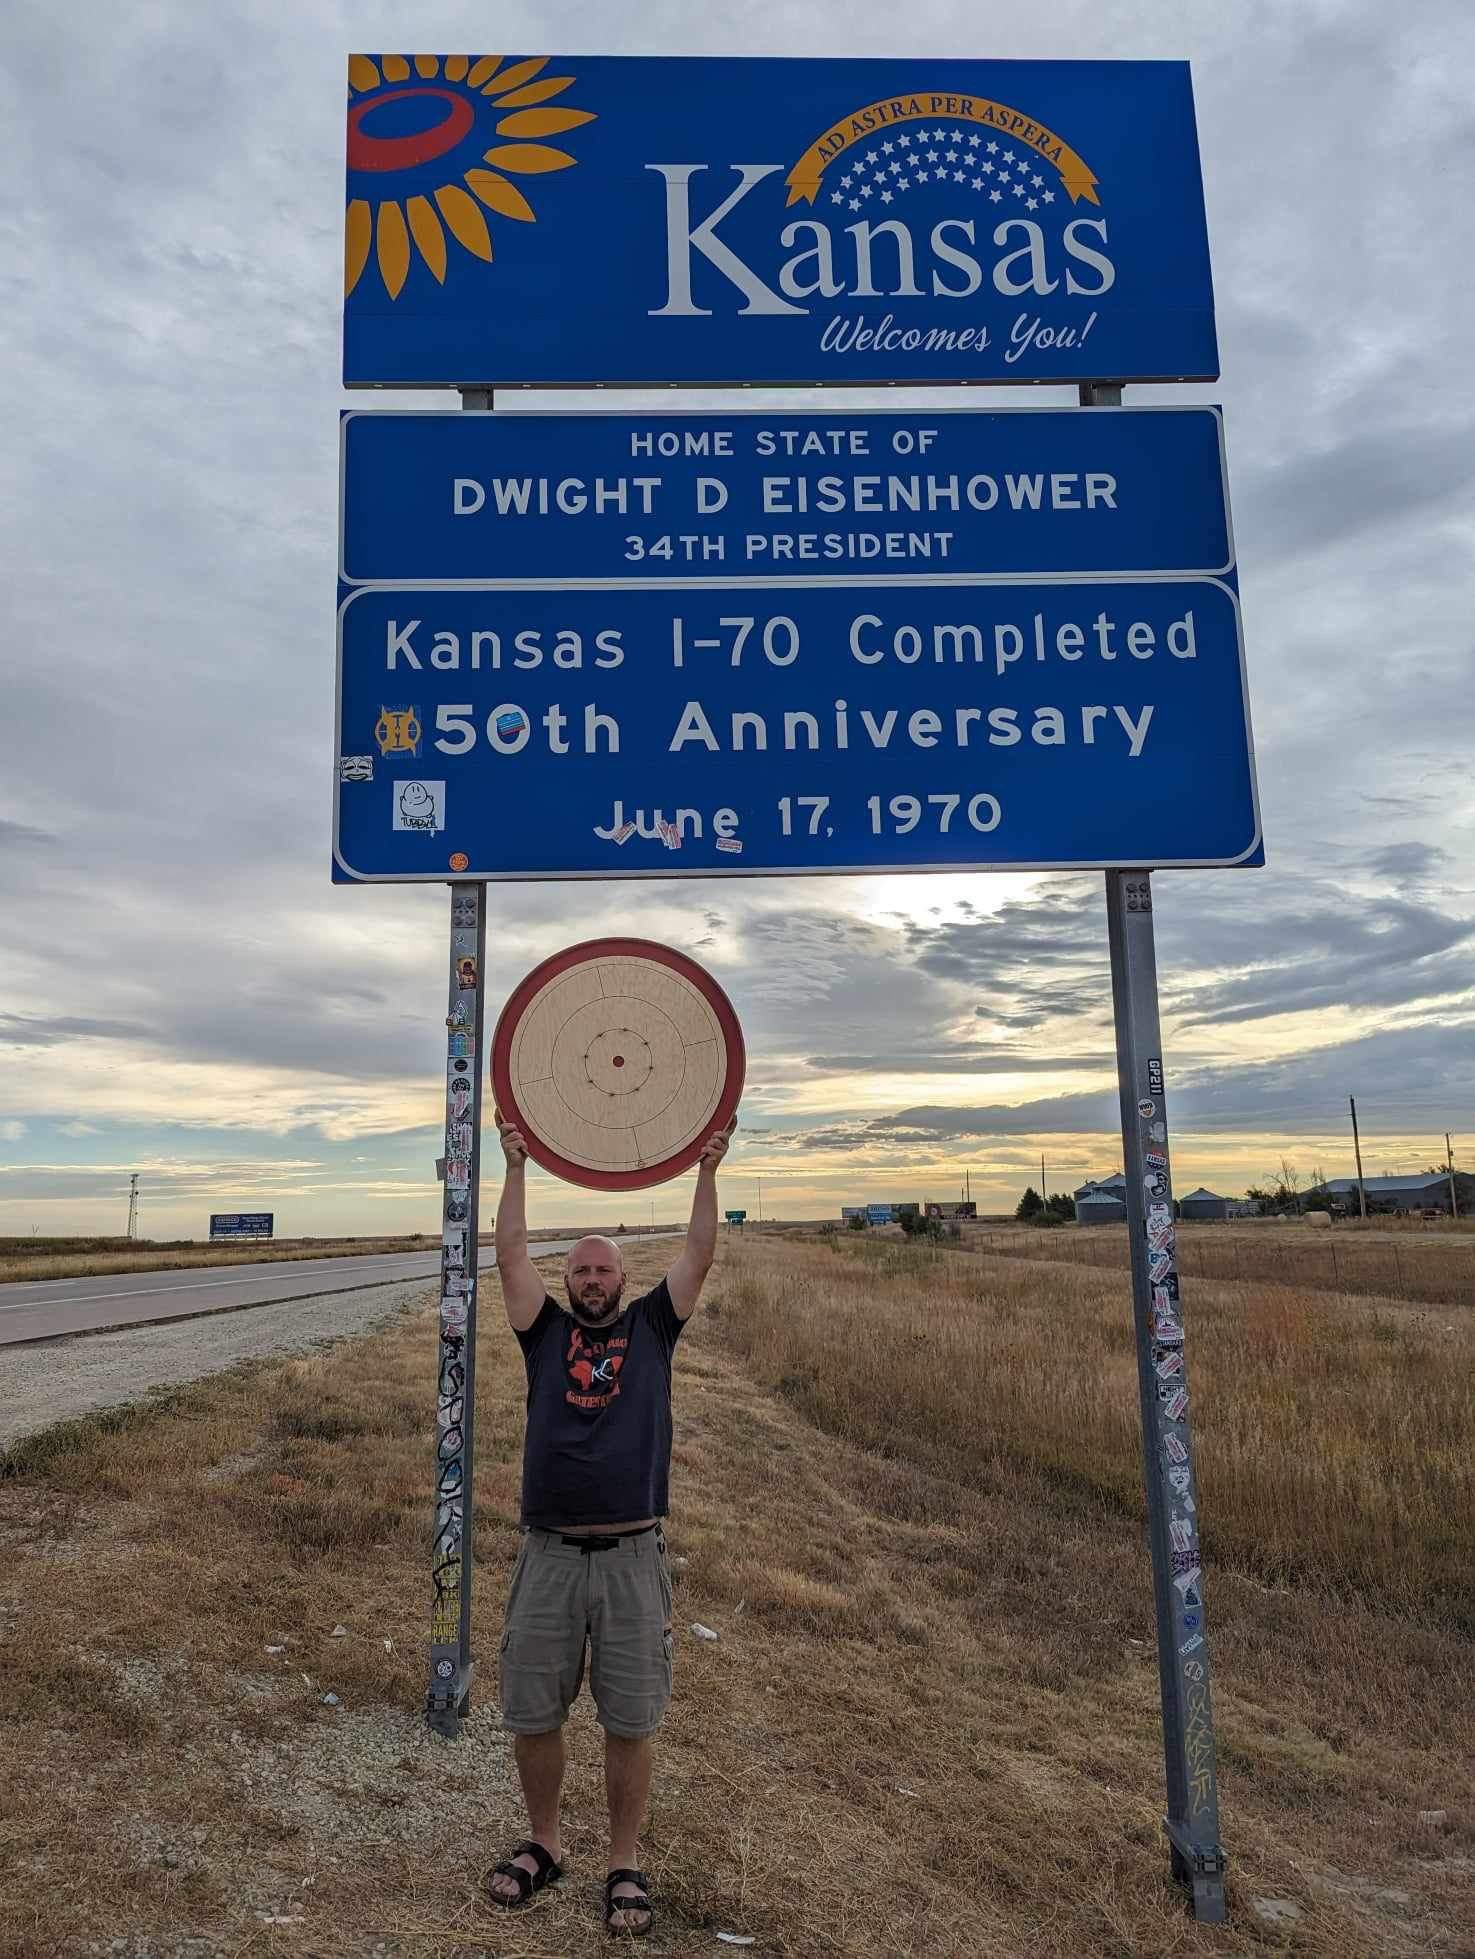 Jeremy Tracey poses with crokinole board before Kansas sign on highway